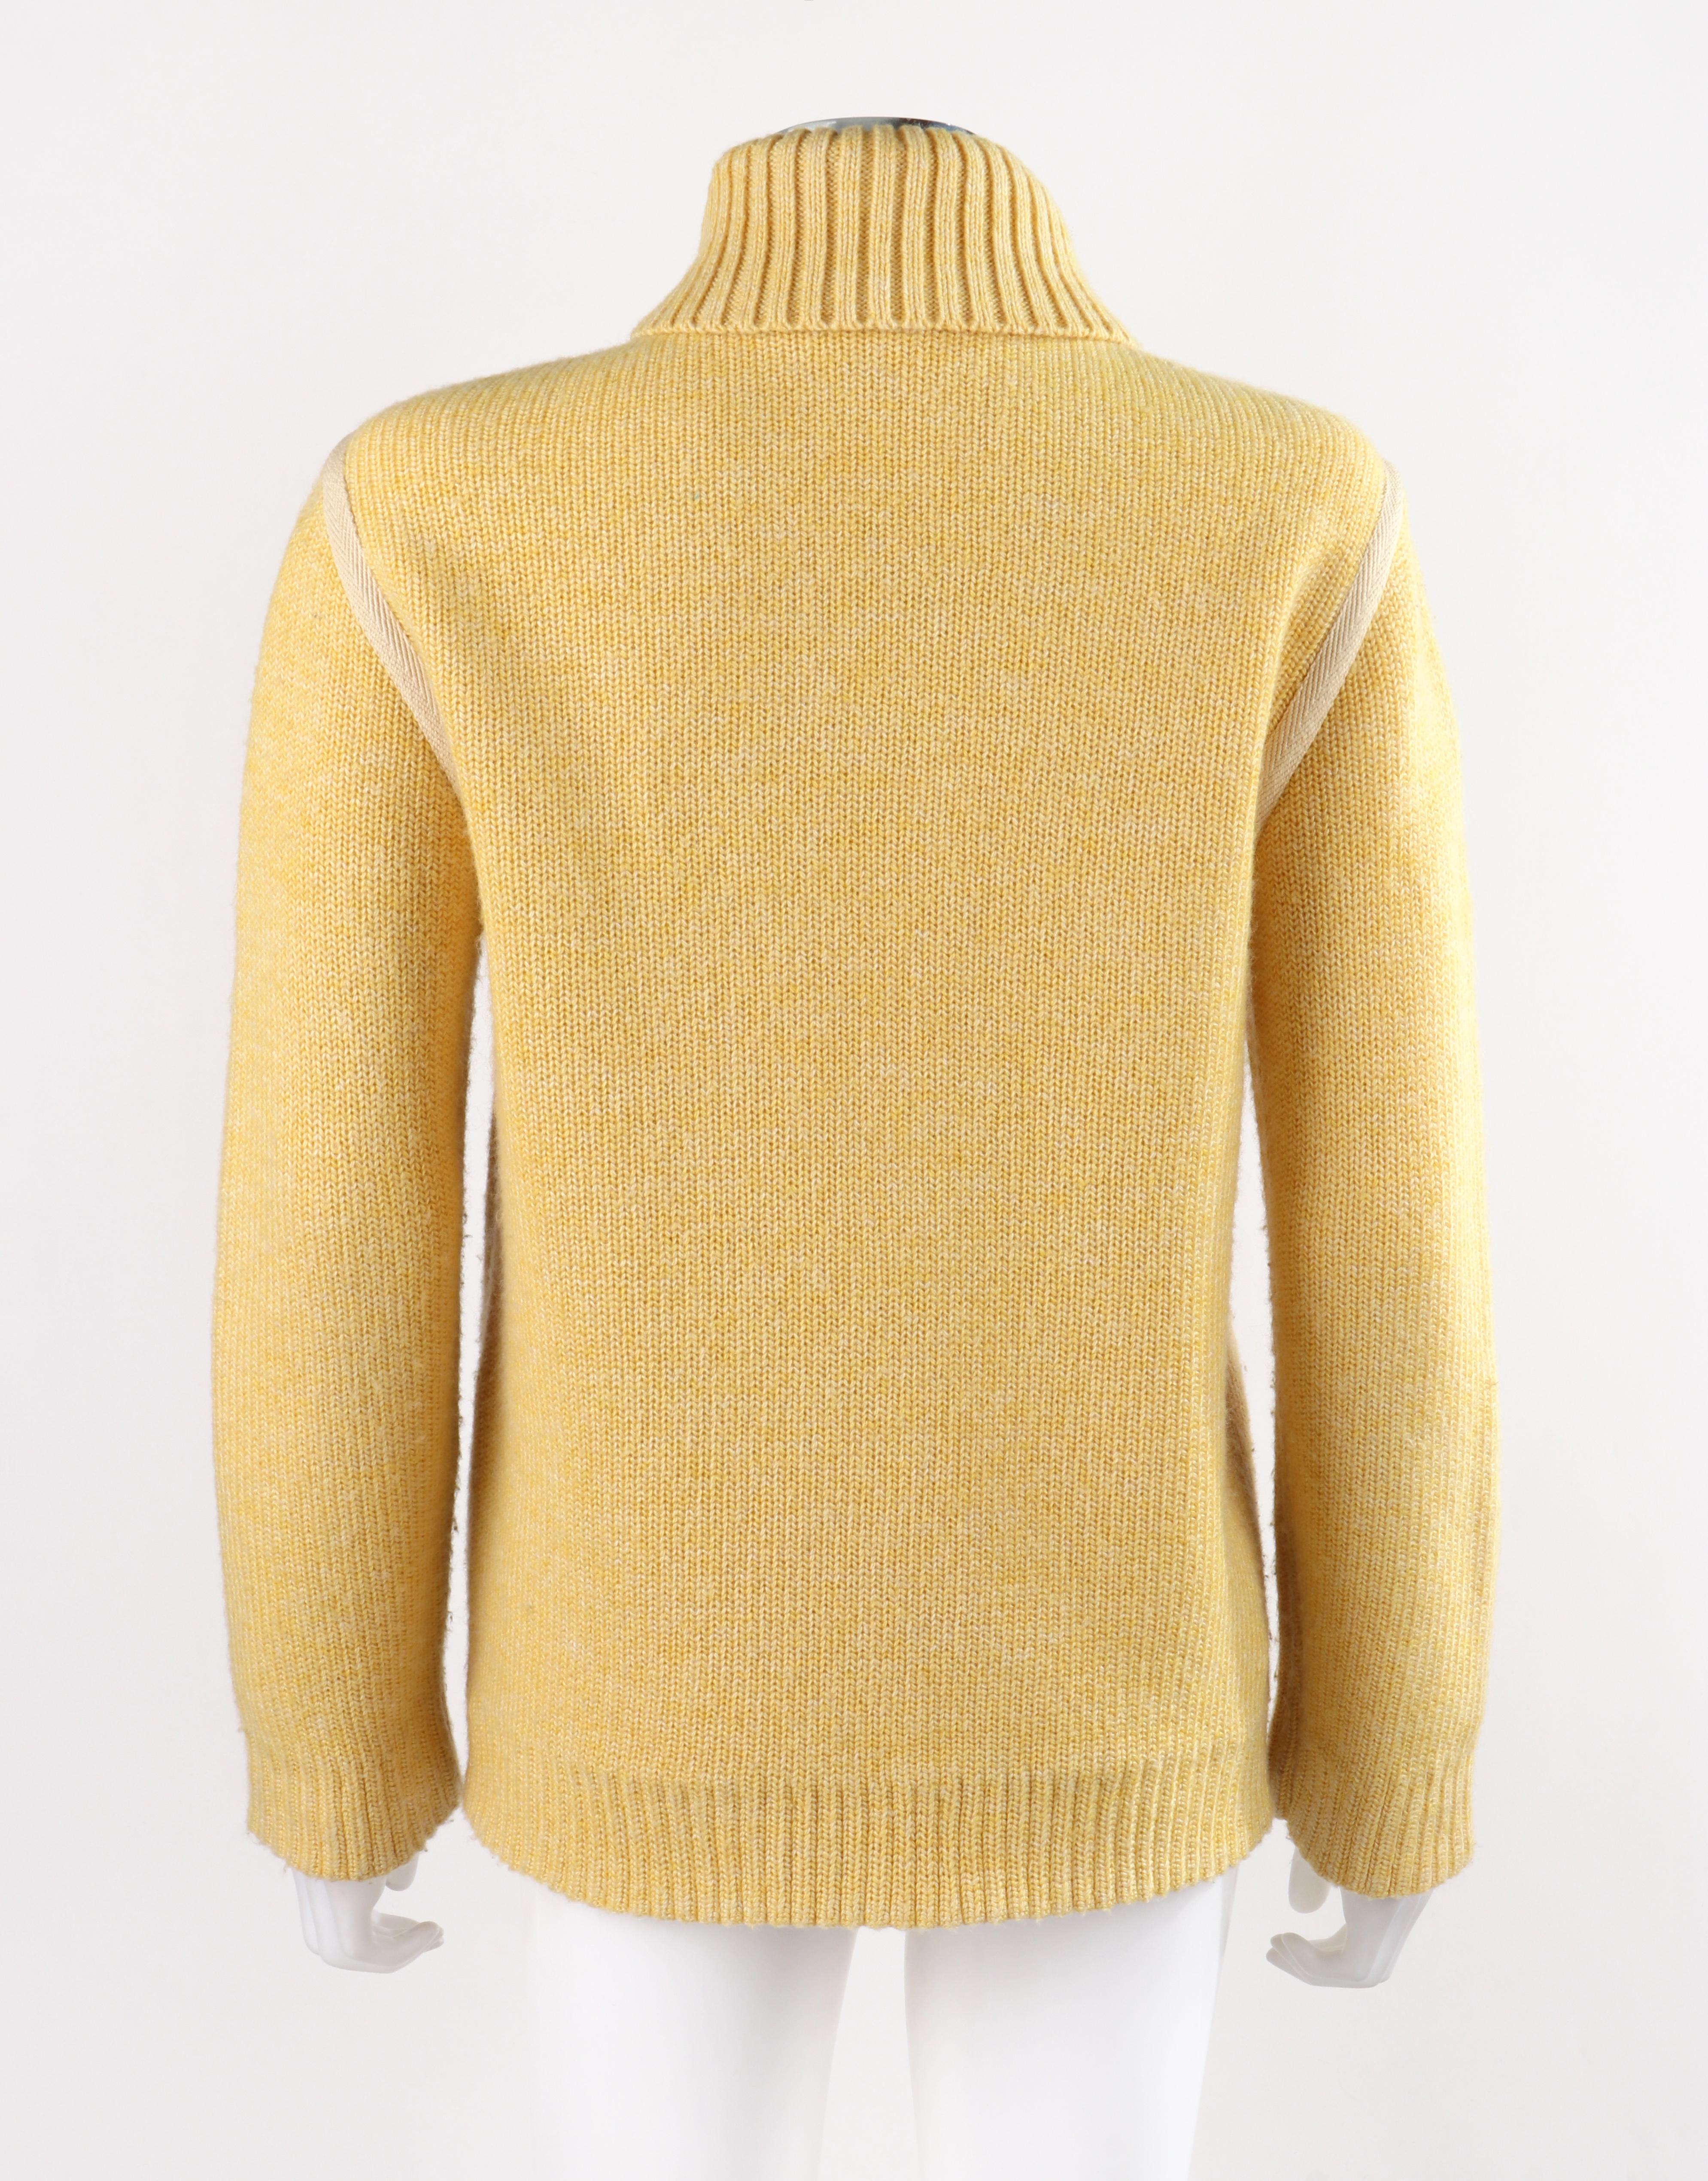 Women's COURREGES c.1980’s Yellow Knit Double Breasted Leather Cardigan Sweater Jacket